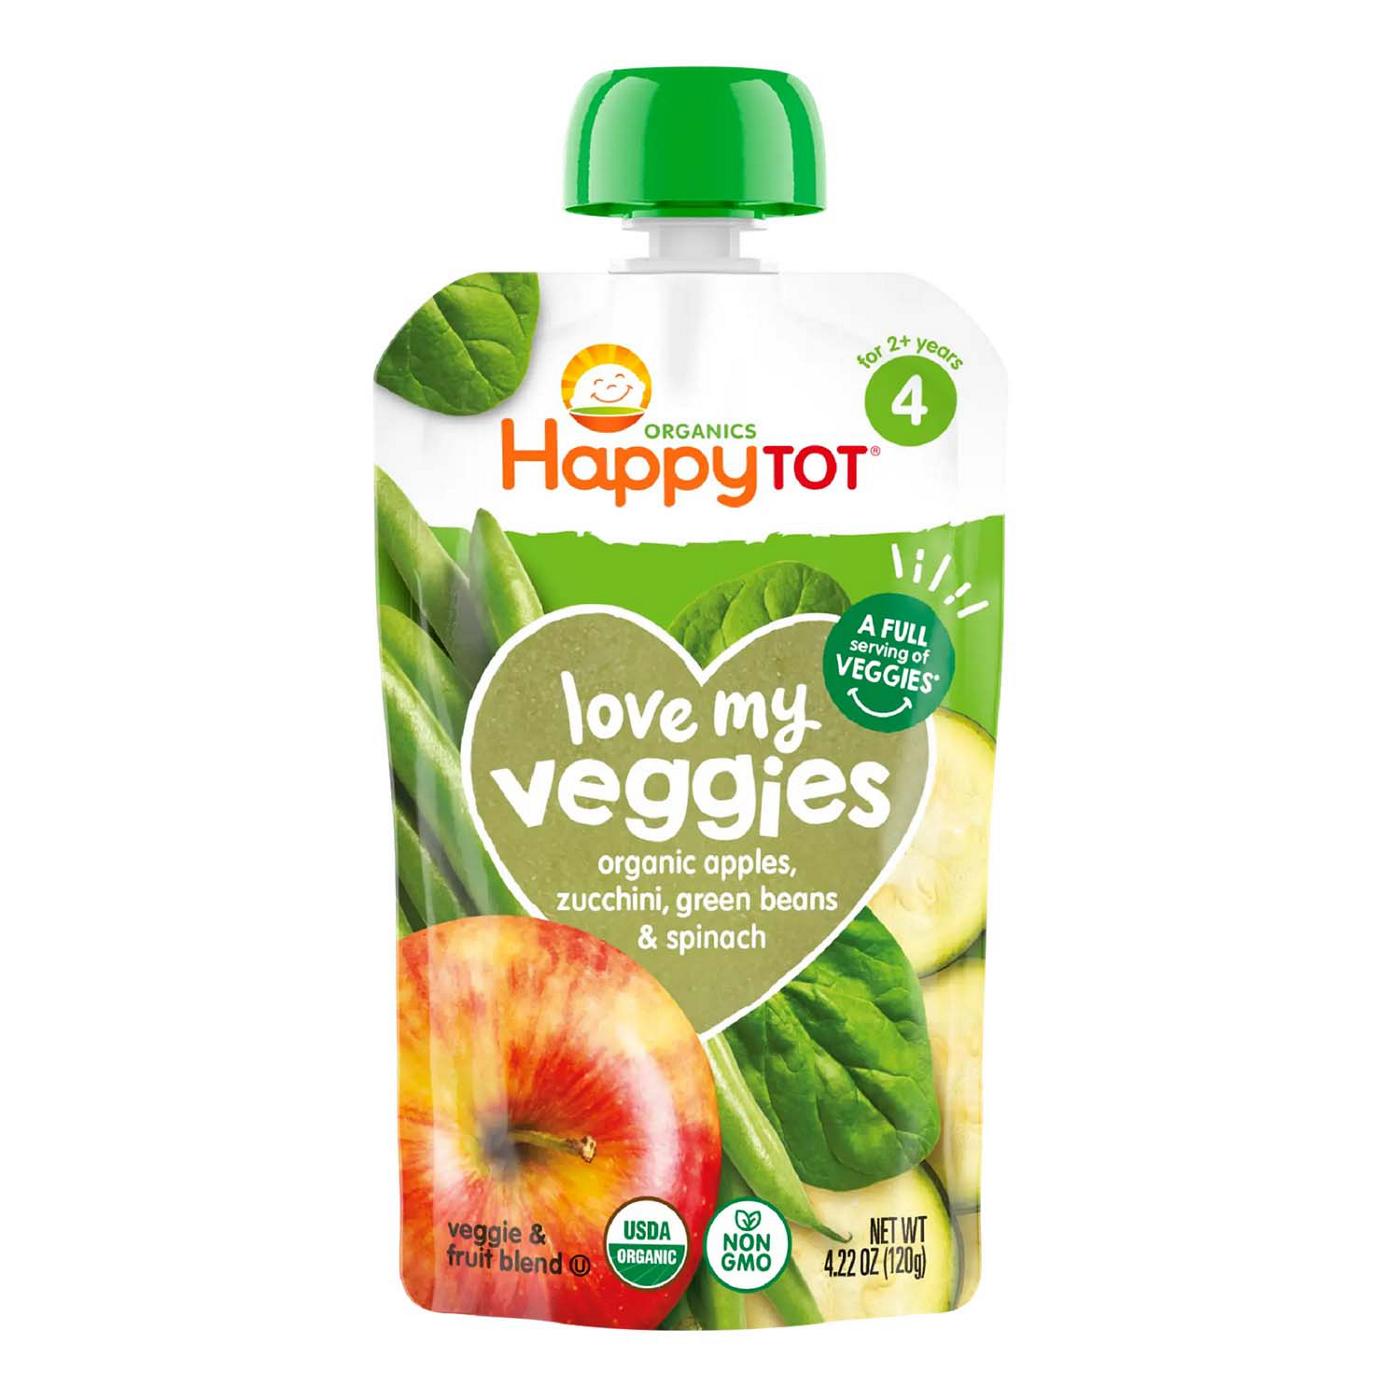 Happy Tot Organics Love My Veggies Pouch - Apple, Zucchini, Green Beans & Spinach; image 1 of 5